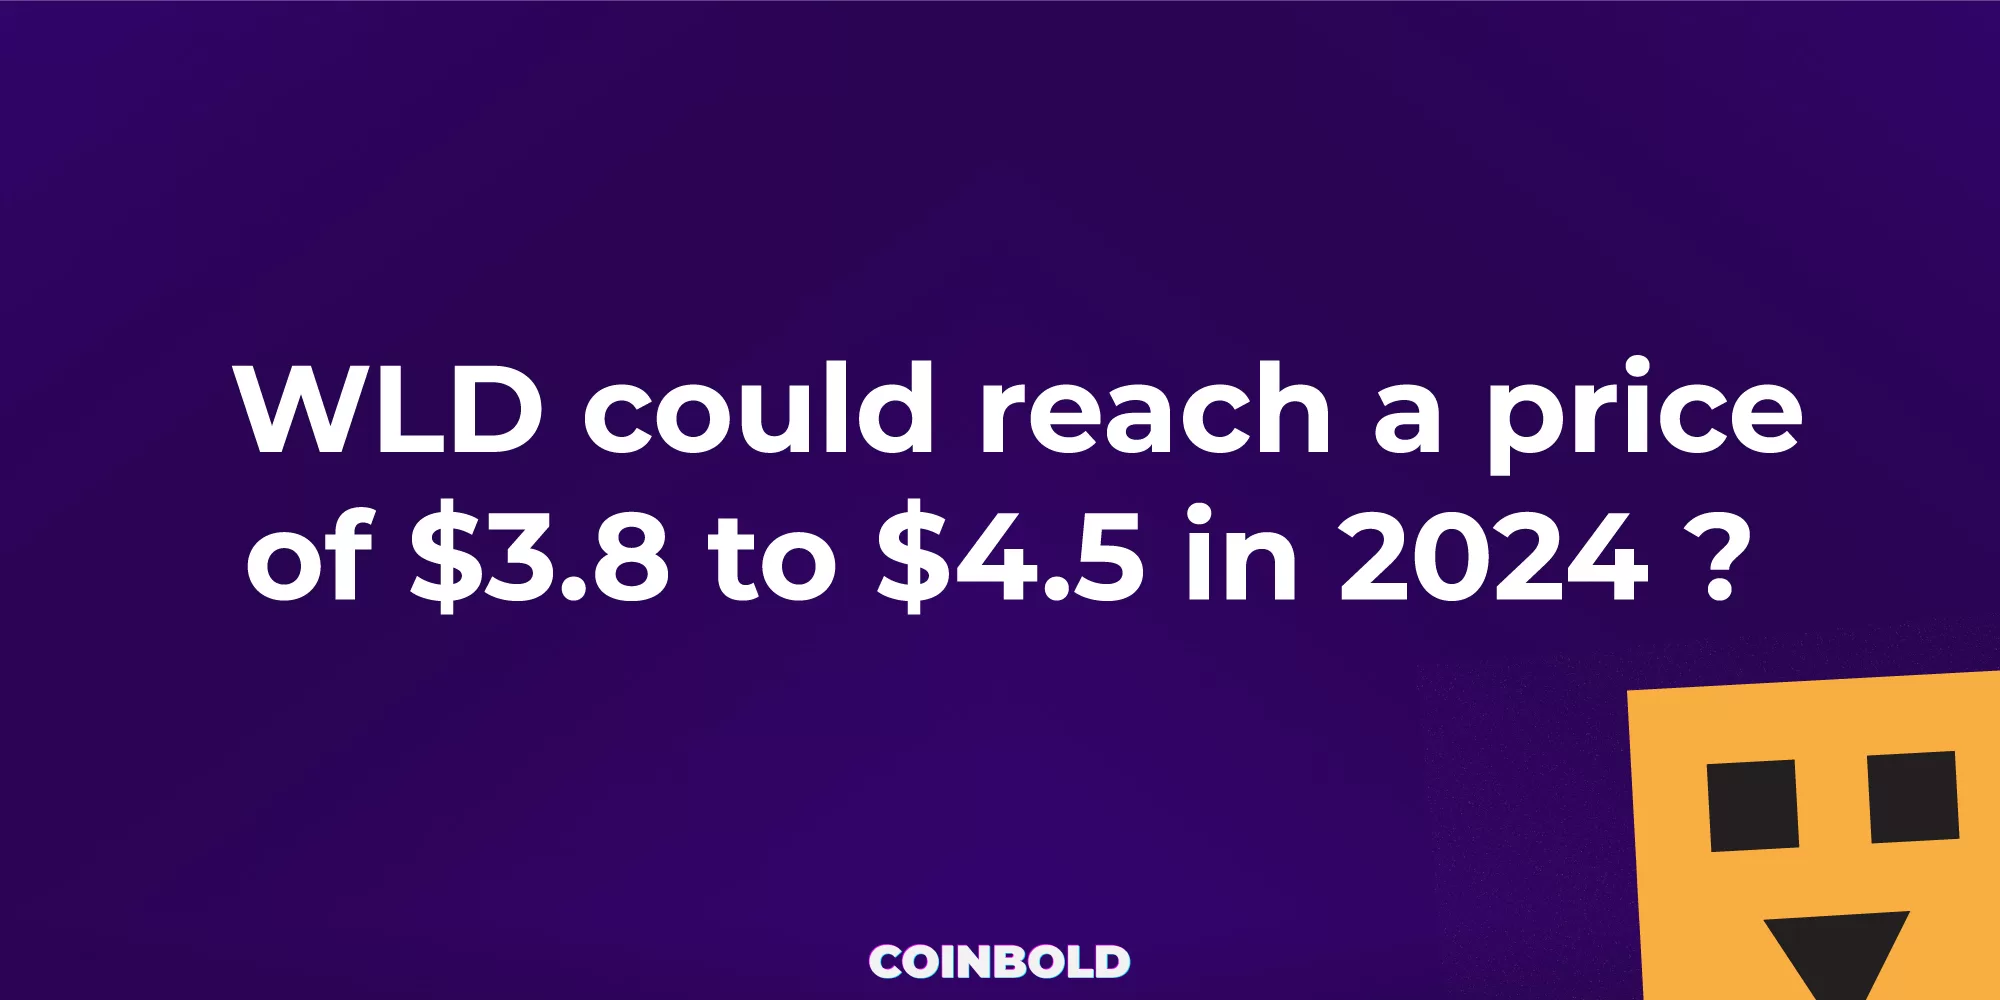 WLD could reach a price of 3.8 to 4.5 in 2024